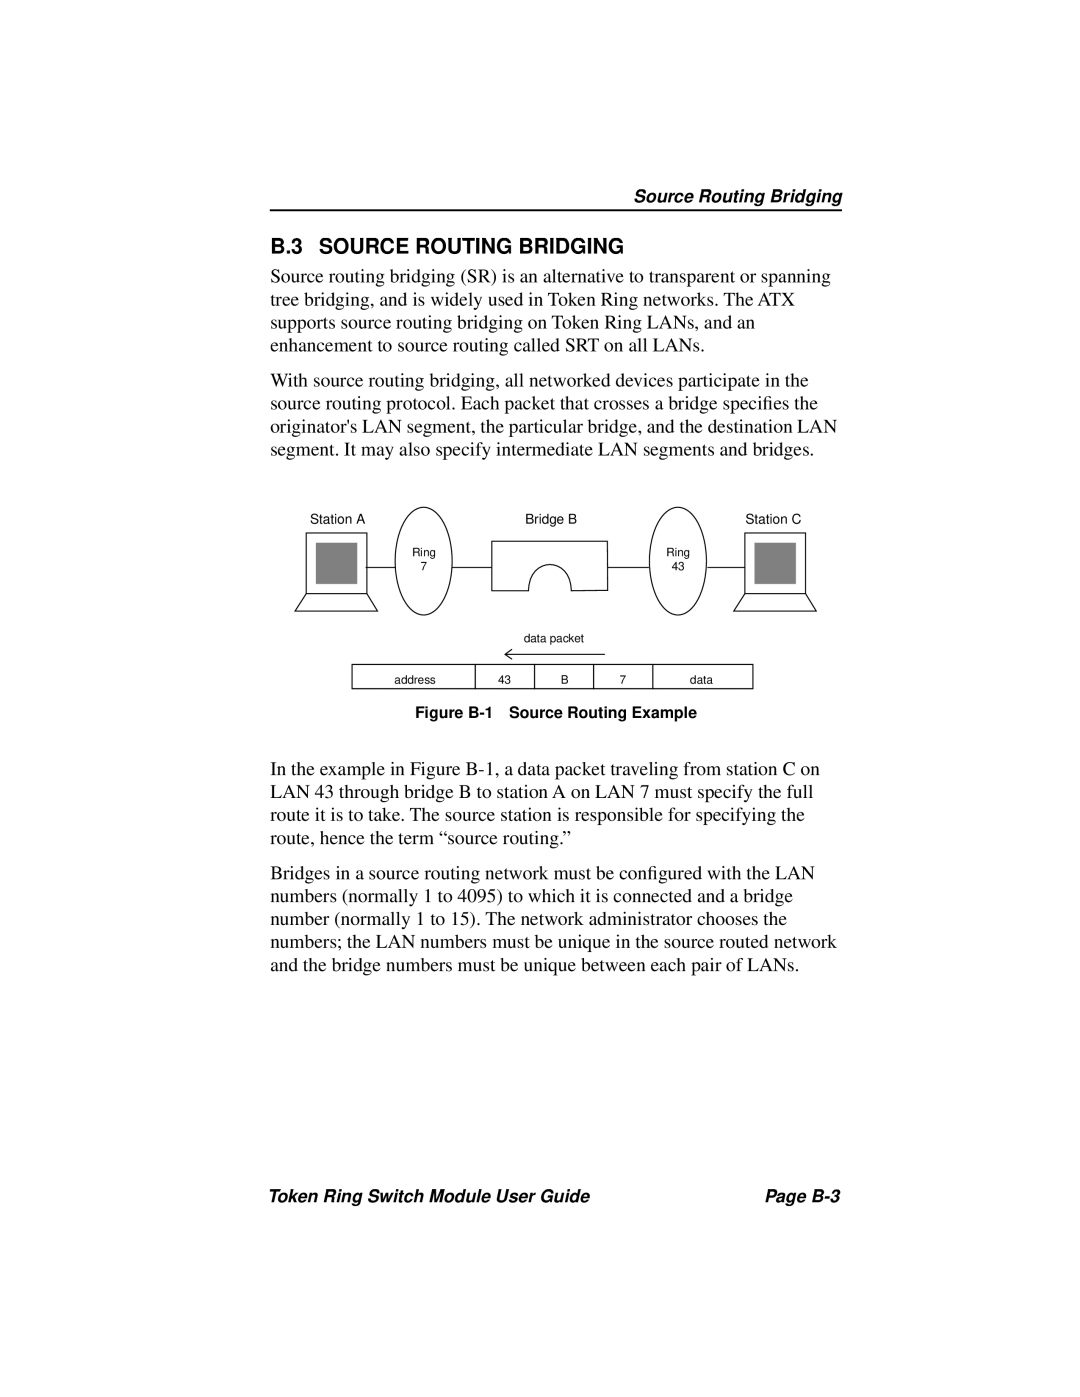 Cabletron Systems 3T02-04 manual B.3 SOURCE ROUTING BRIDGING, Figure B-1 Source Routing Example 